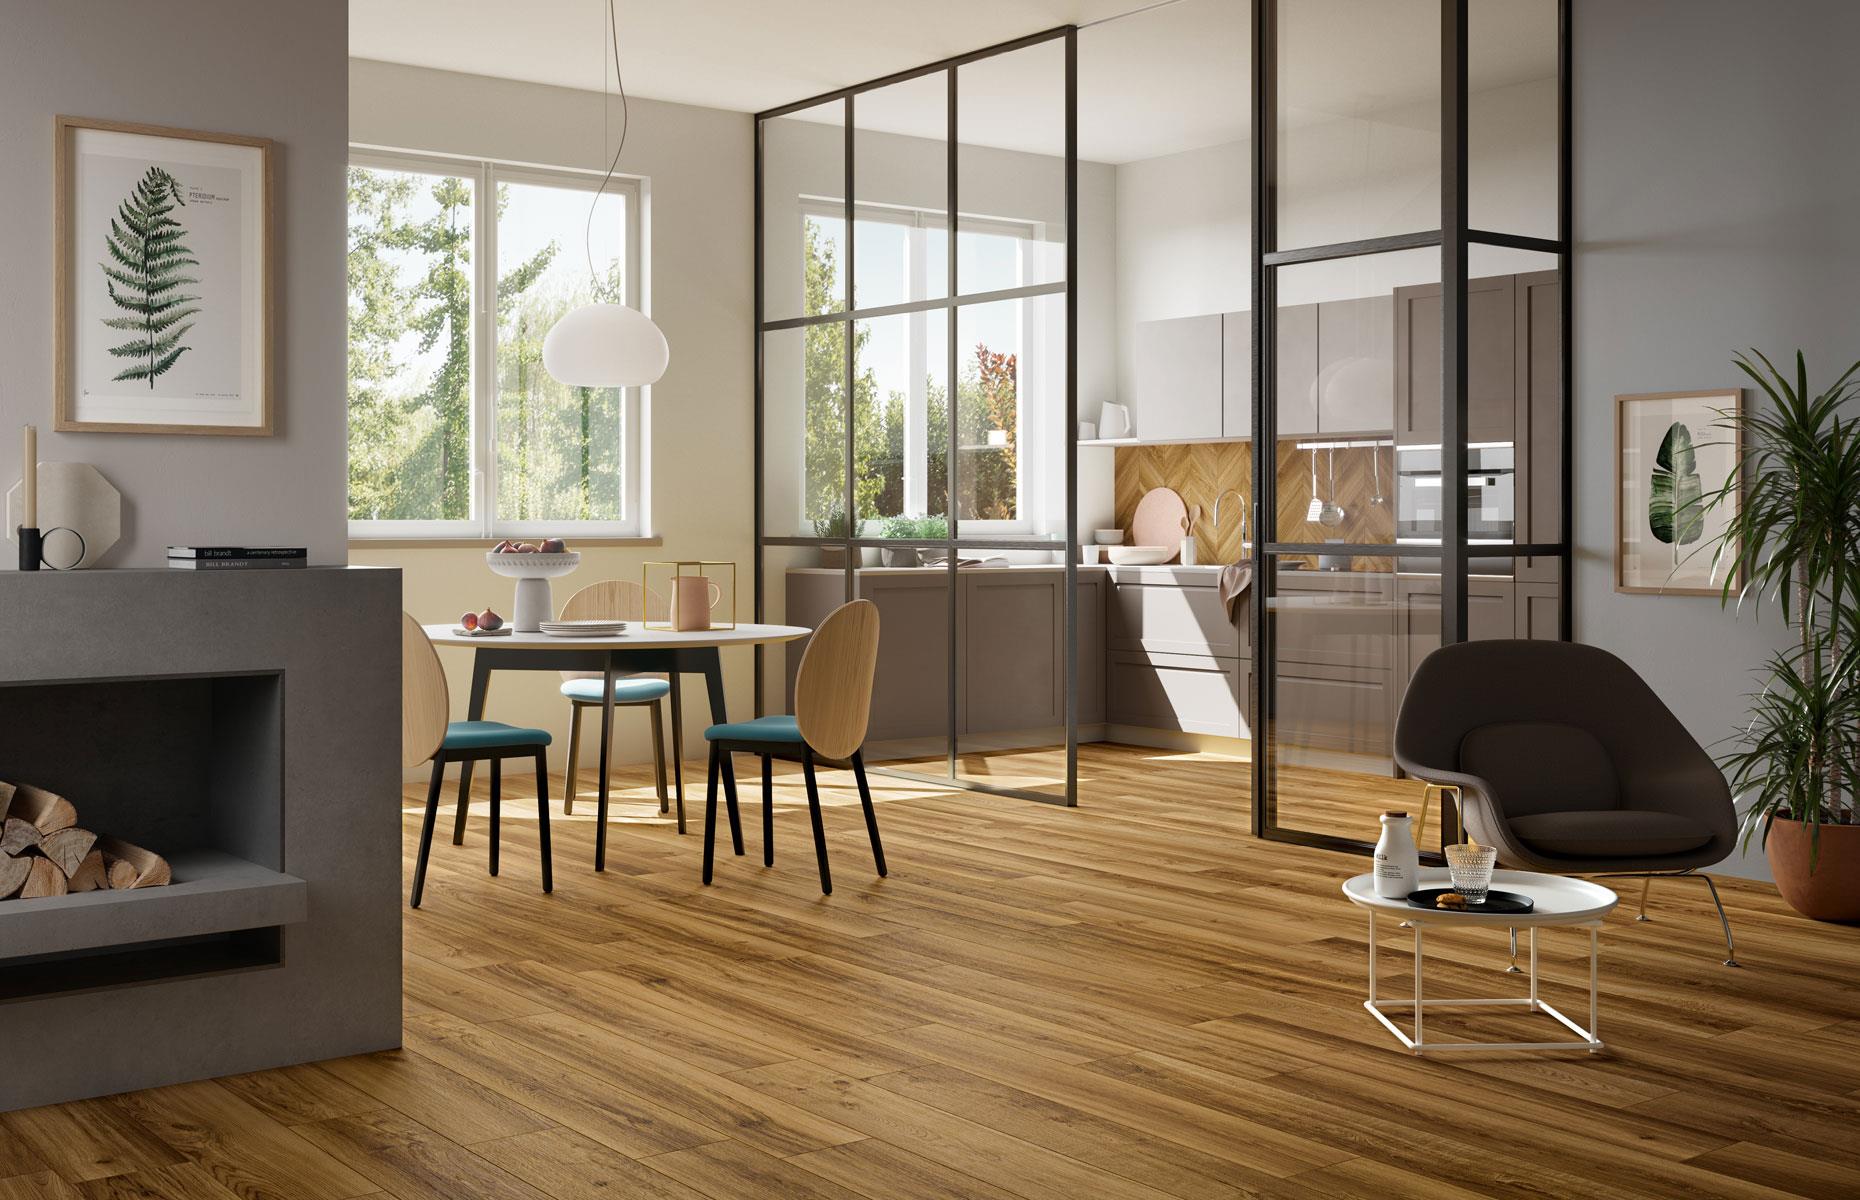 <p>An open-plan living and kitchen area has many benefits but sometimes shutting off the kitchen whilst cooking is more practical. Glass walls create the best of both worlds; noise steam and cooking smells can be closed off without compromising on light or sense of space. </p>